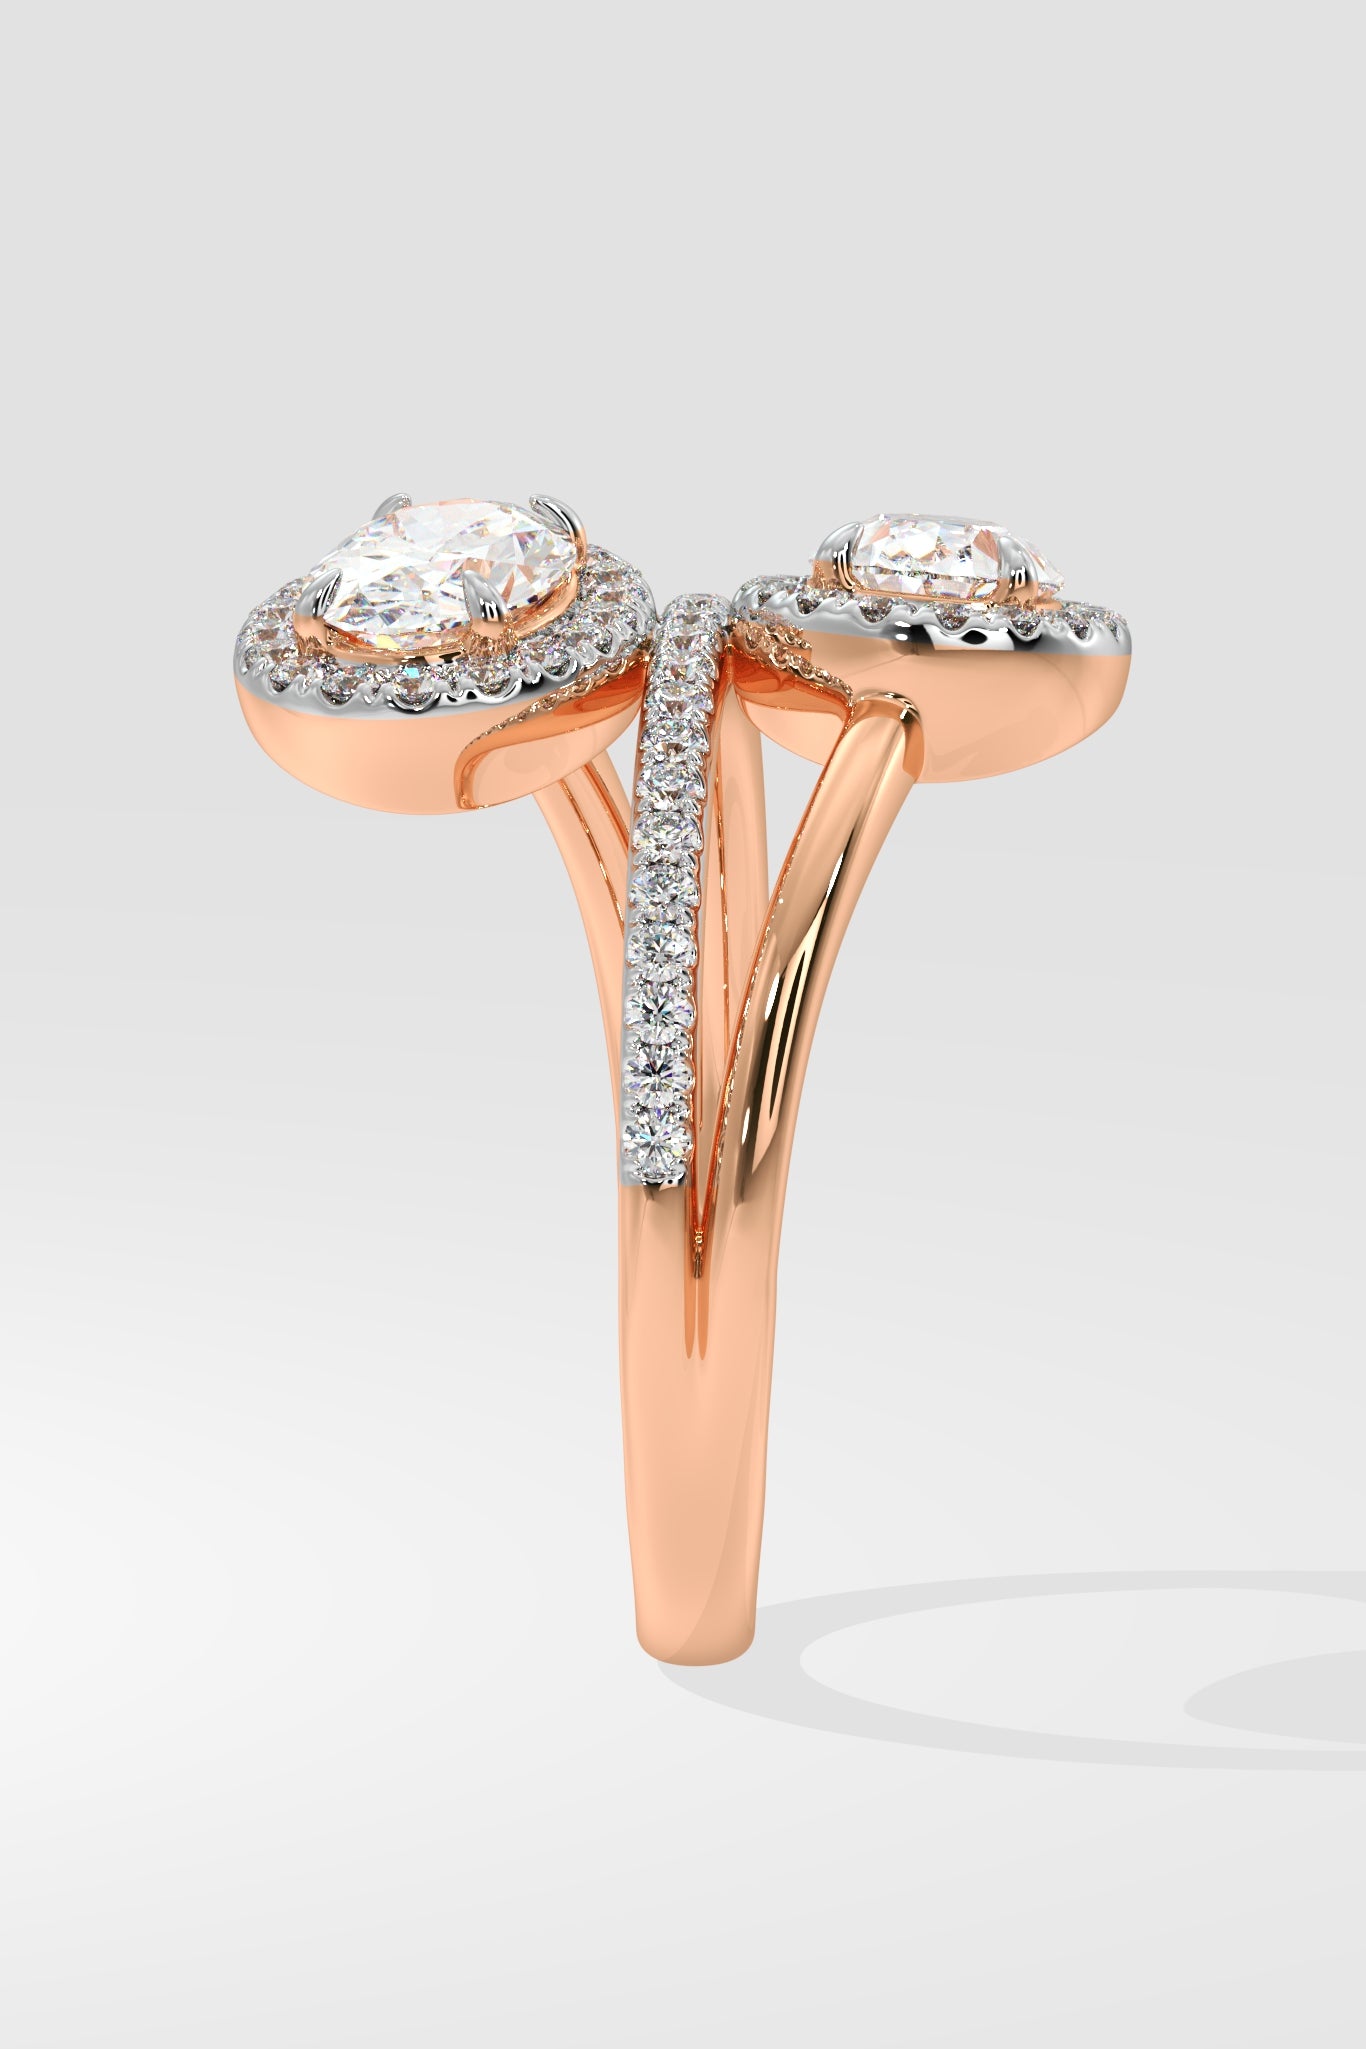 Empowered Two Stone Halo Solitaire Ring - House Of Quadri